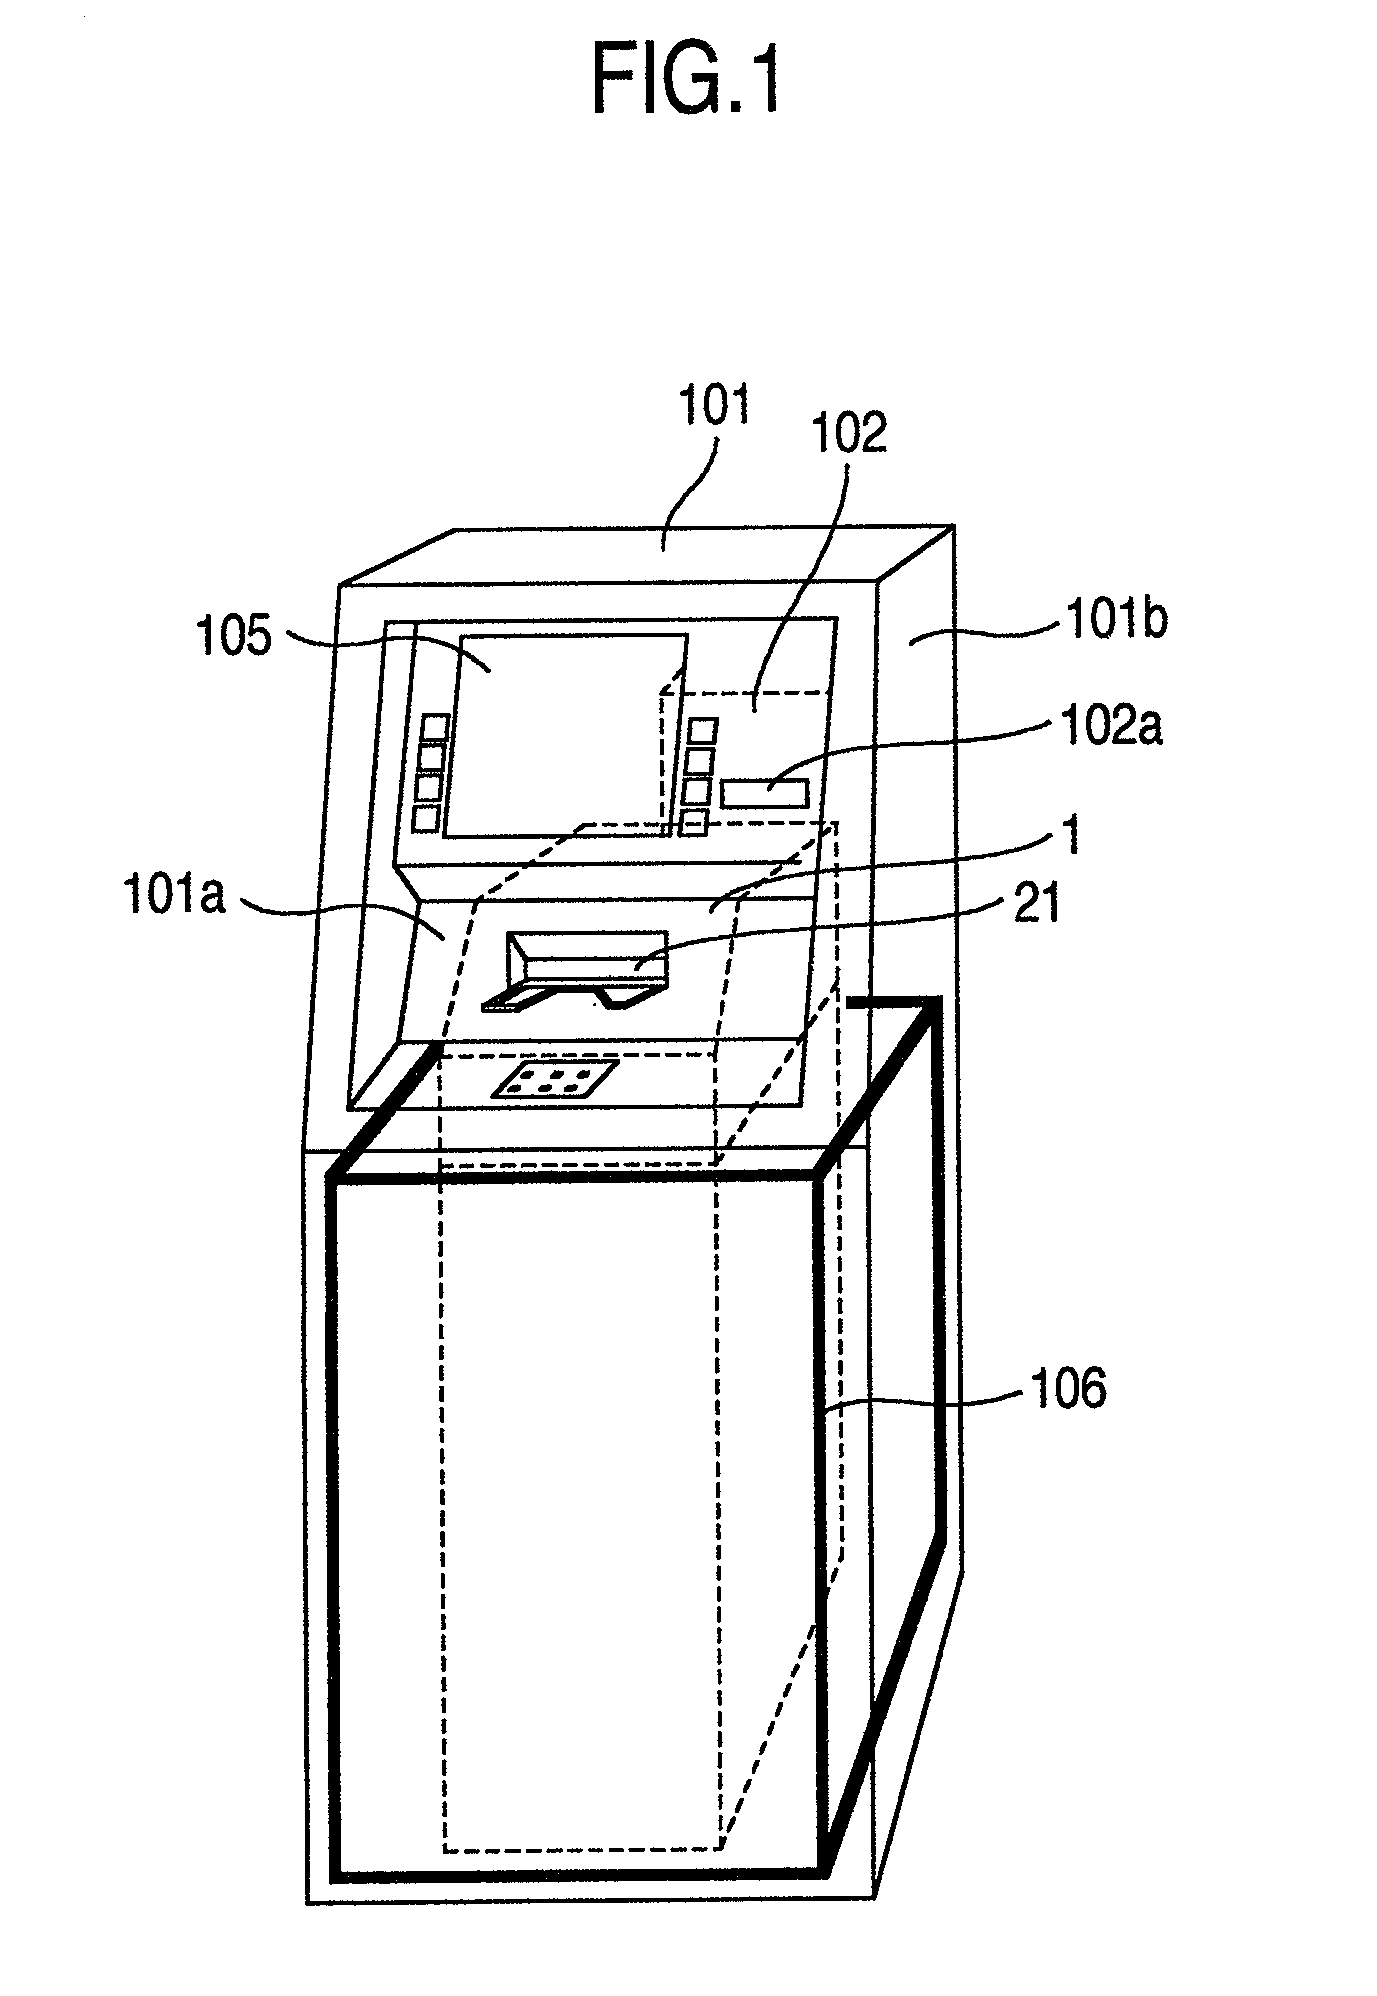 Bill depositing/withdrawing apparatus and method of controlling the same